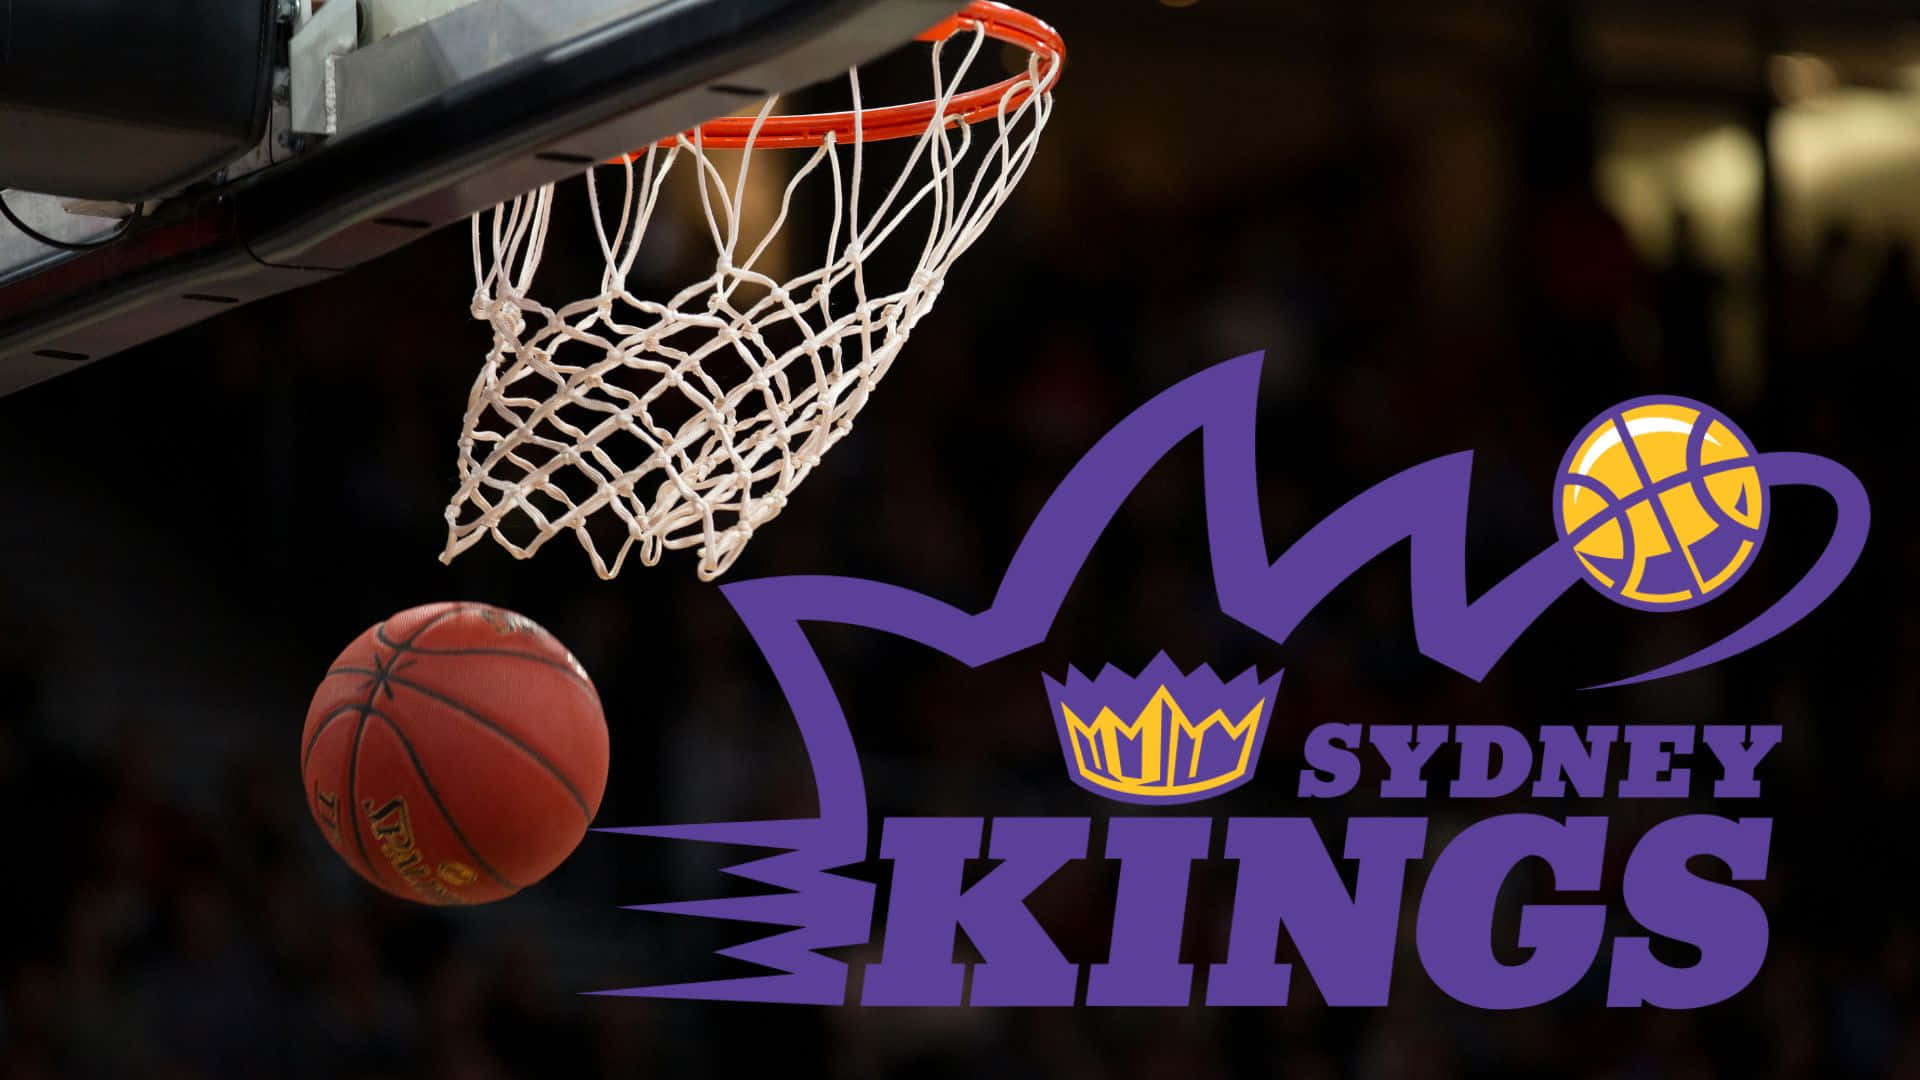 Sydneykings Can Be Translated To 